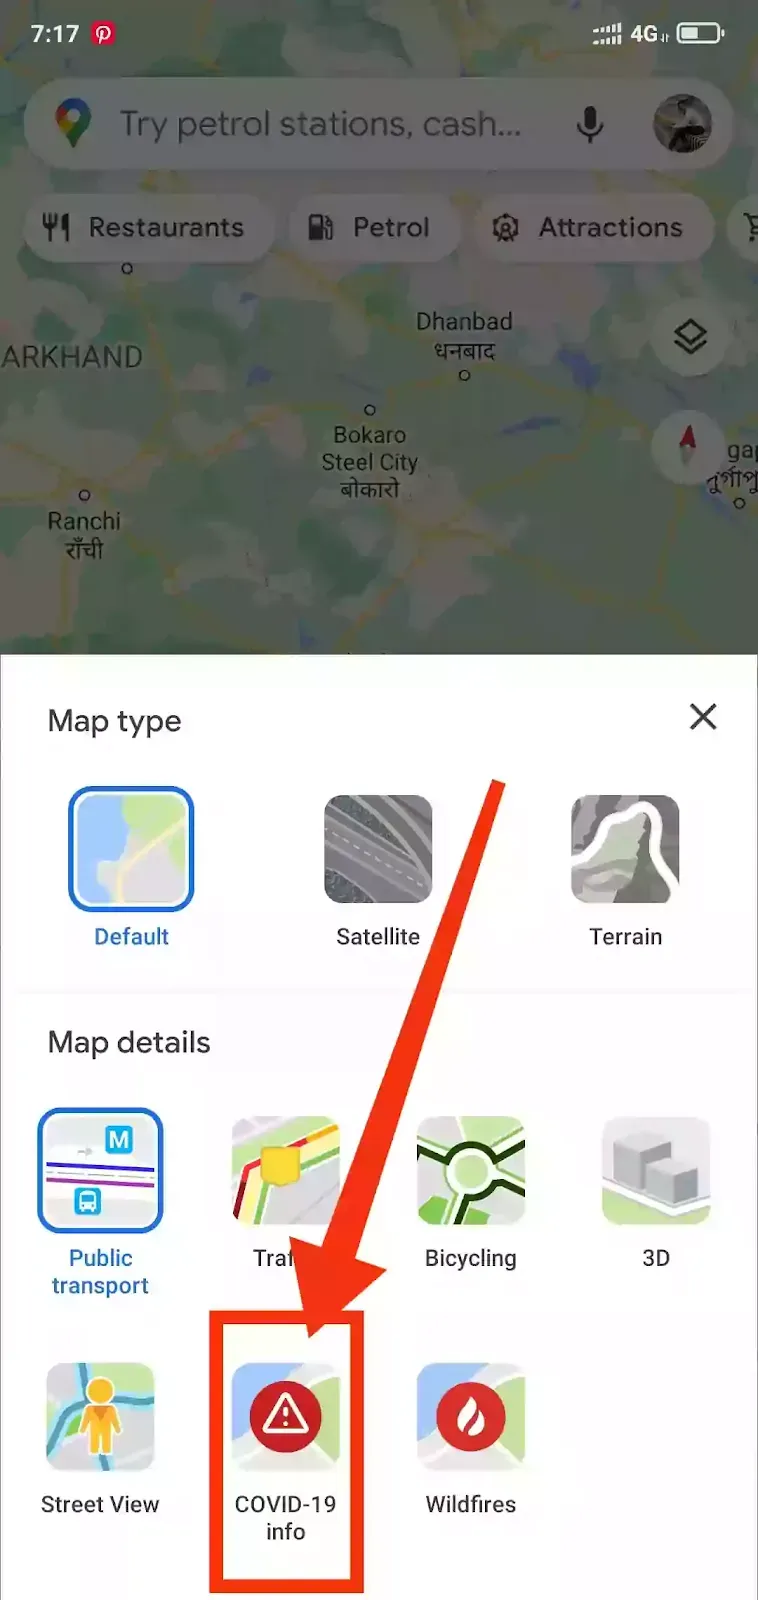 How to check containment zone in Google Maps?